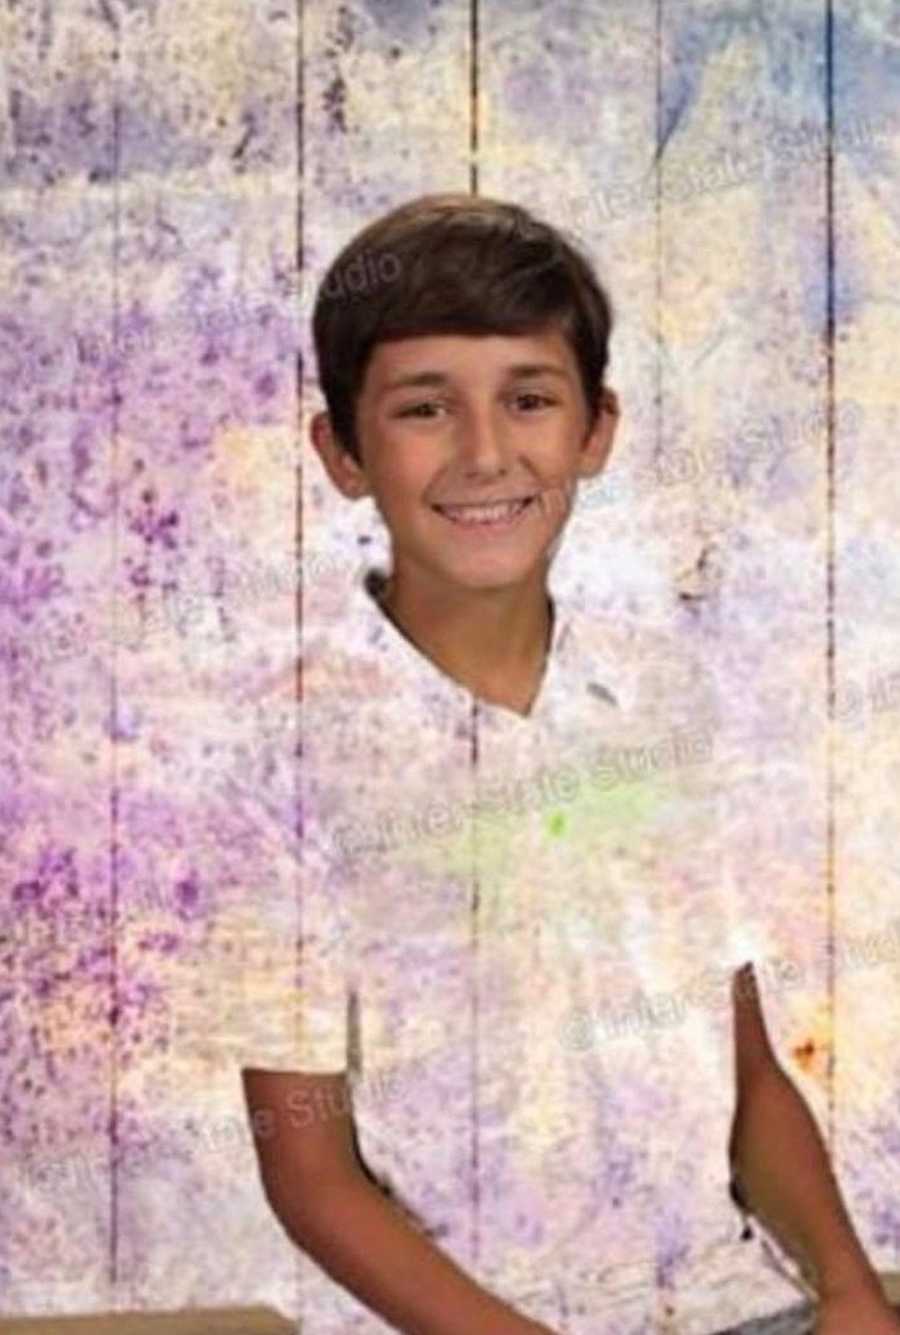 Floating head in purple background as kid wore green shirt that blended in with green screen